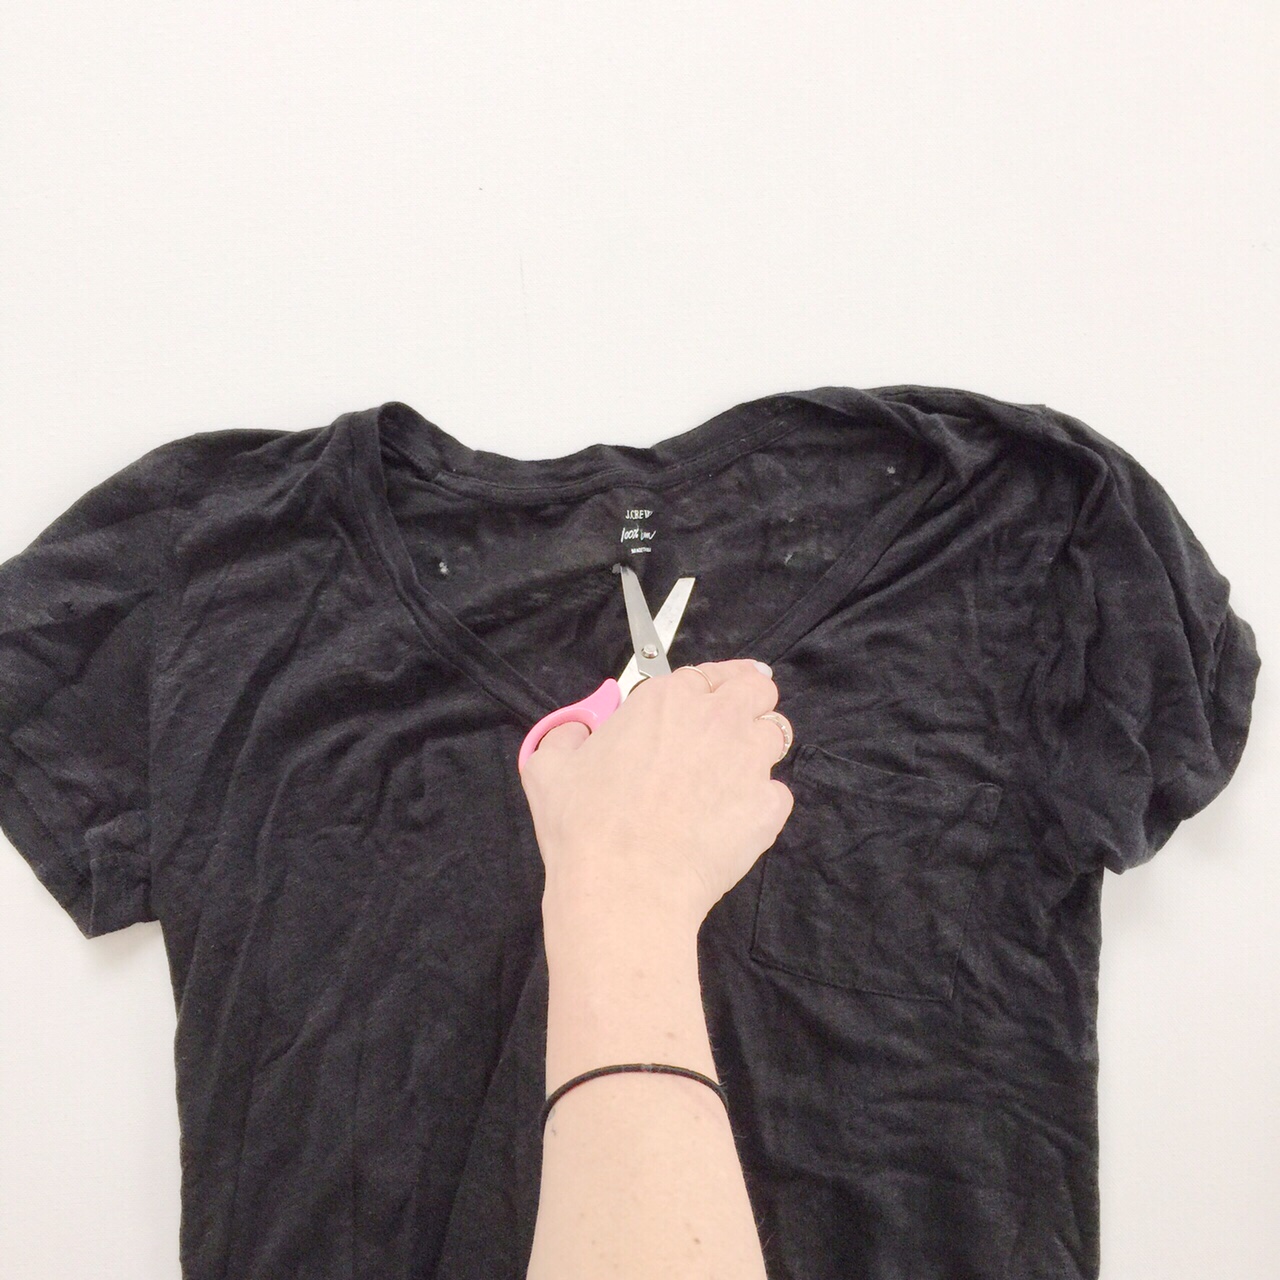 How to make your own distressed t shirt